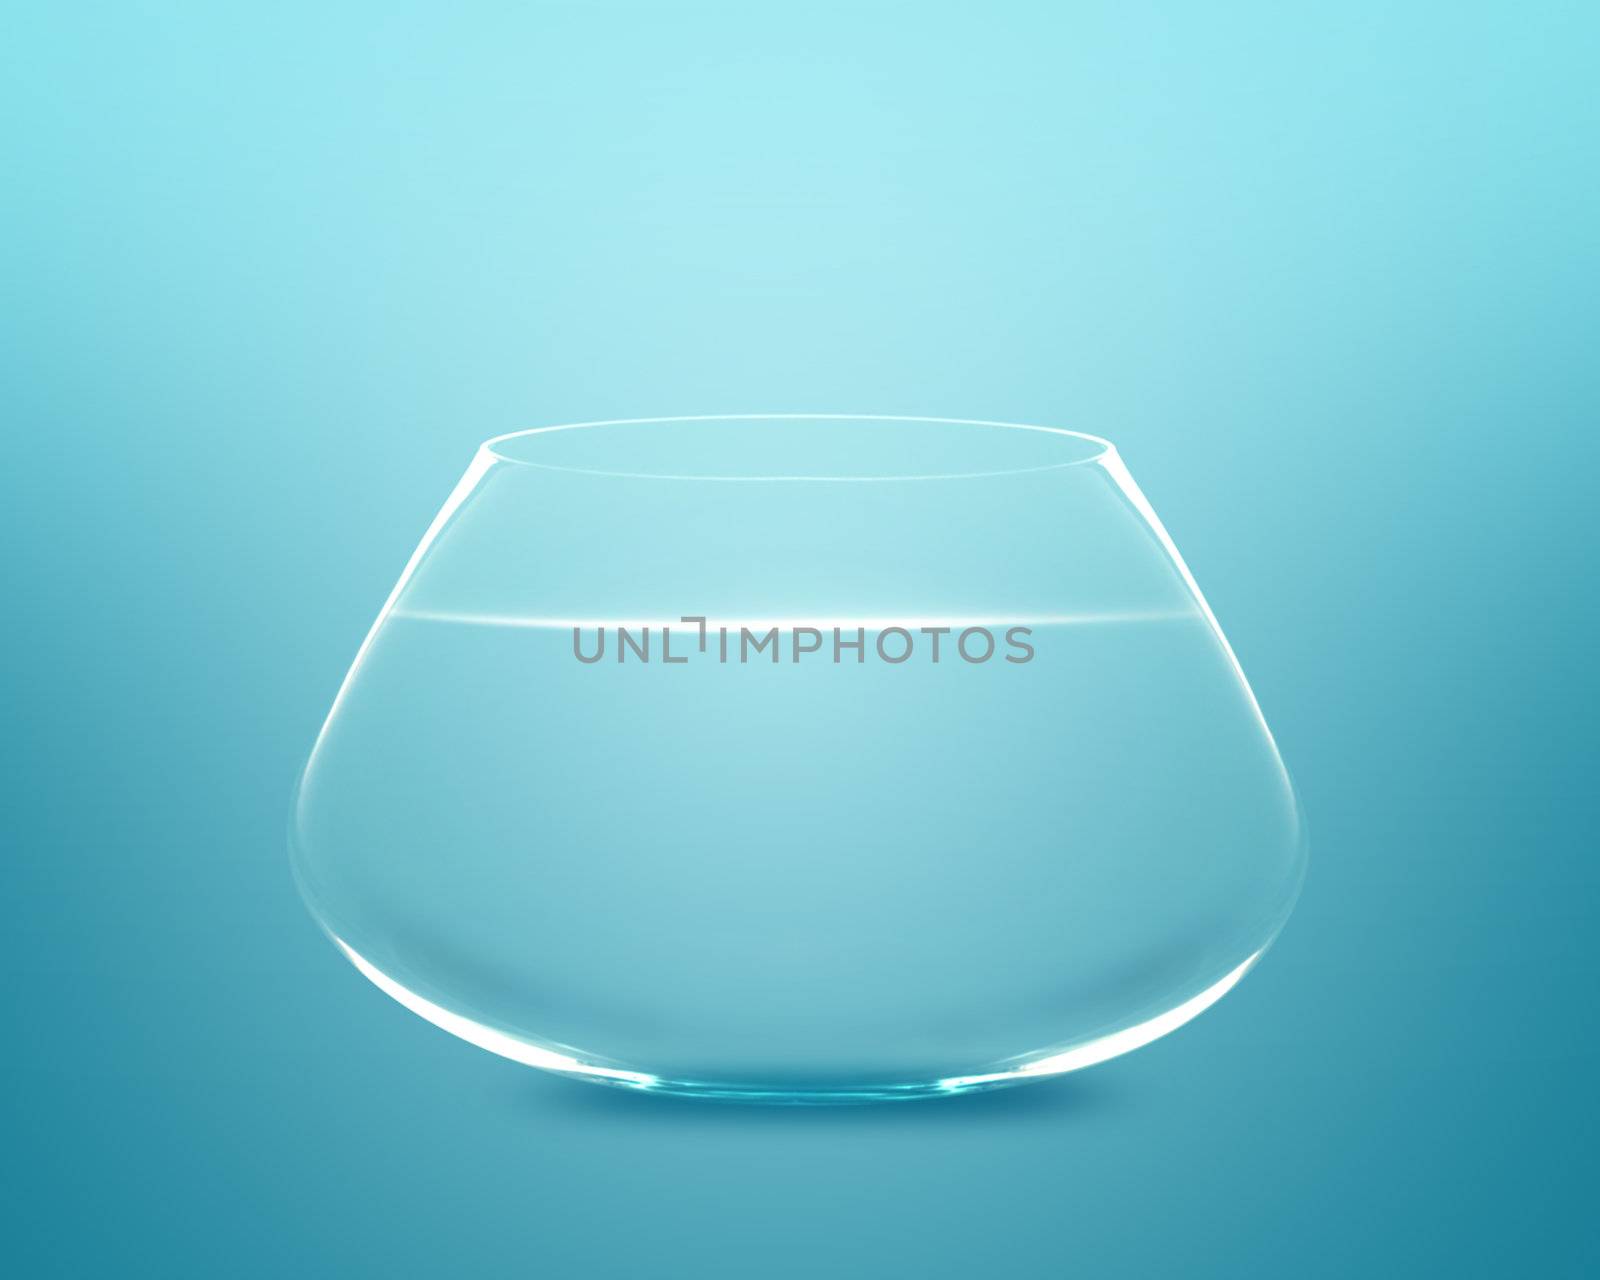 Empty fishbowl with water in front of blue background.